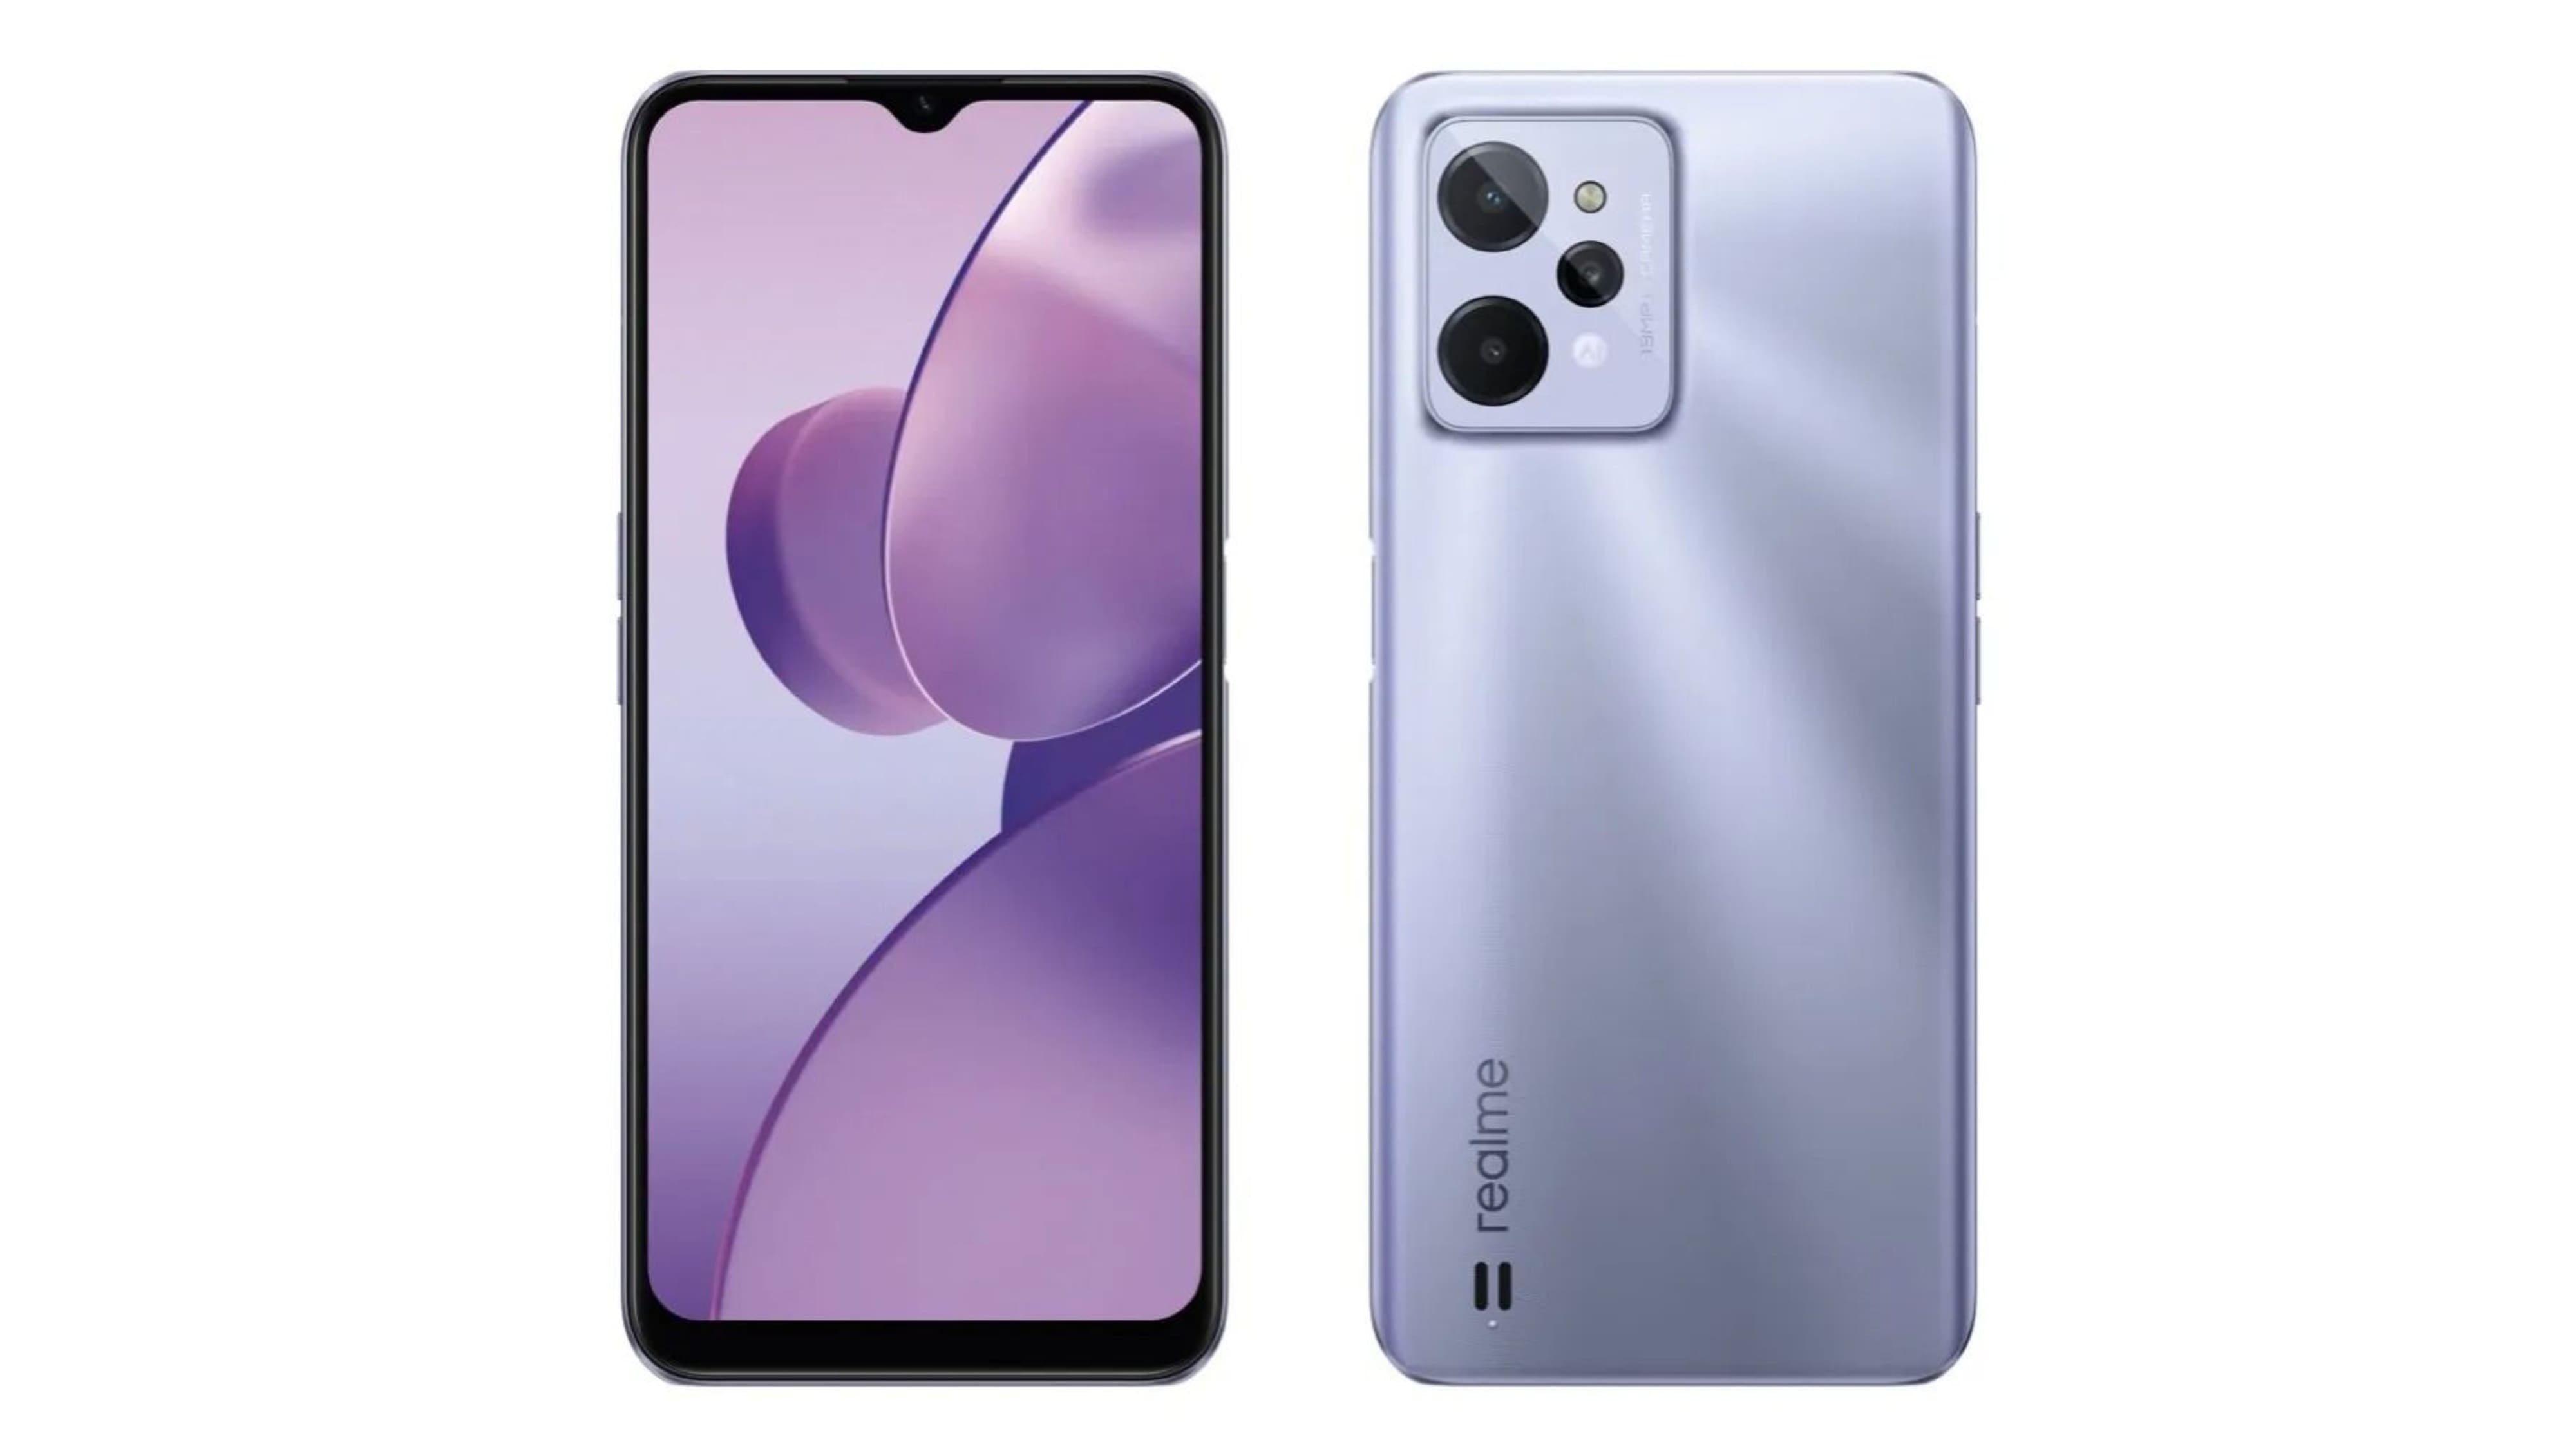 realme C31 leaks in renders revealing its design and colors